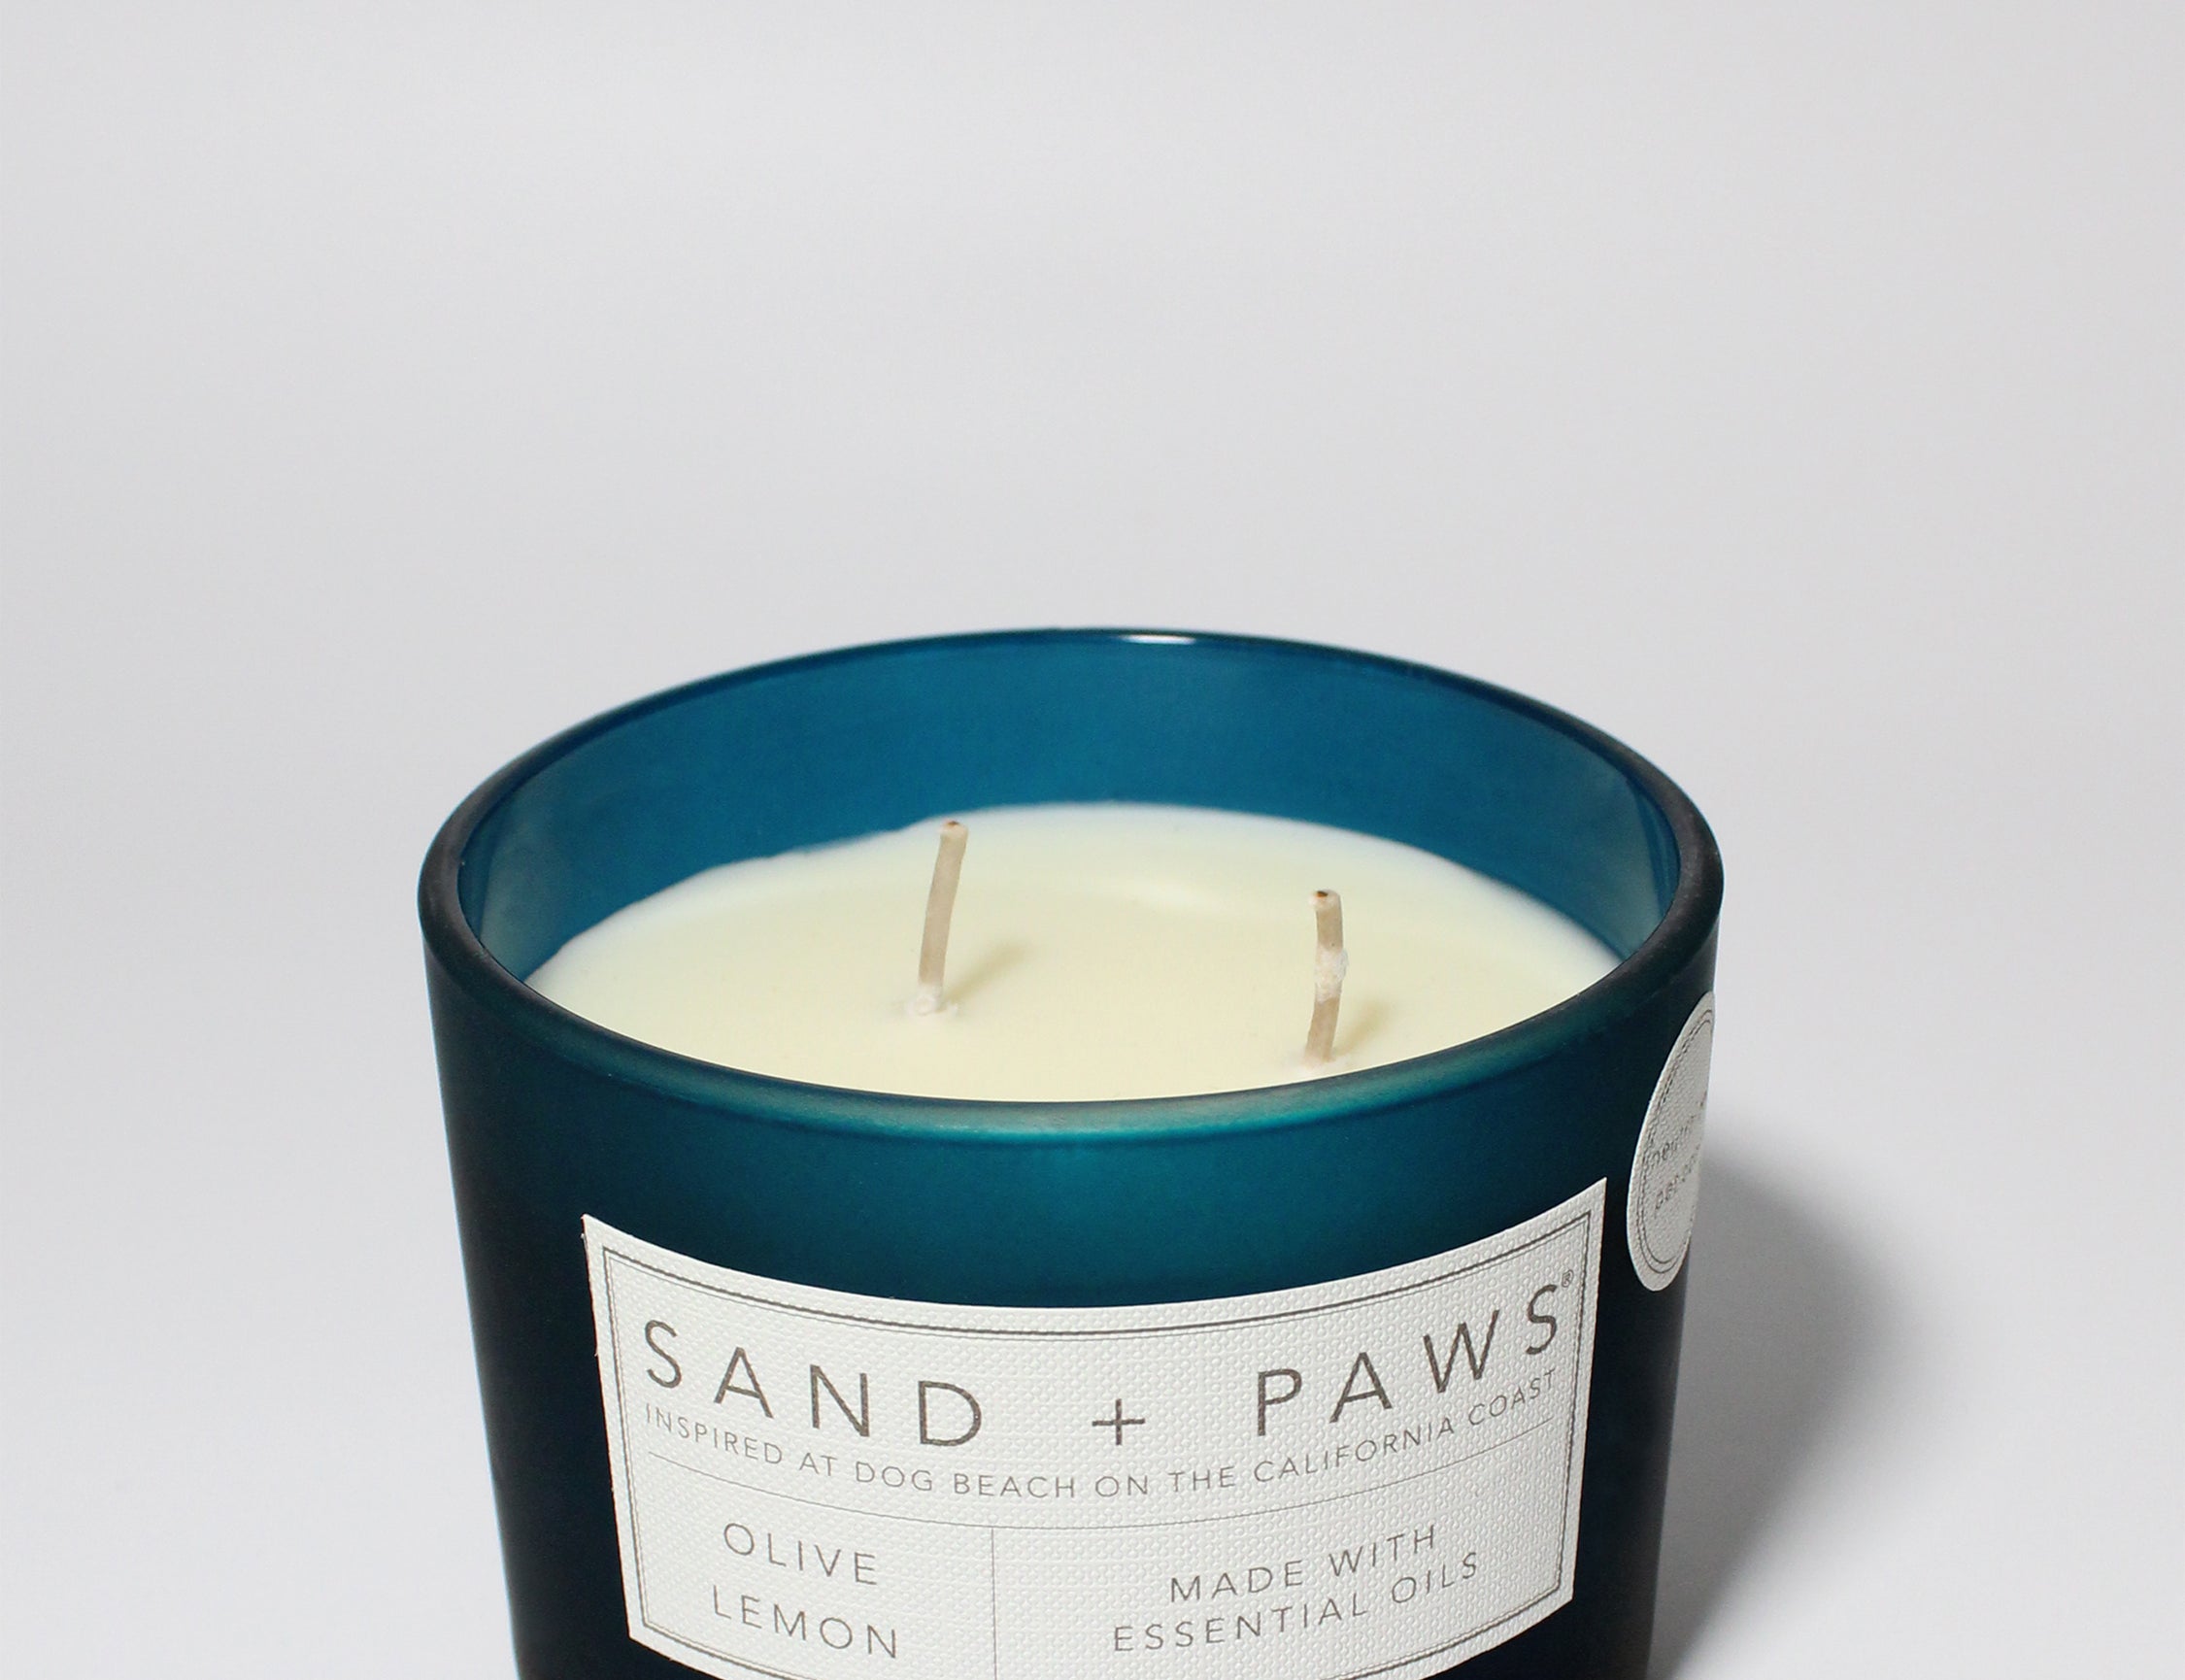 Sand + Paws Olive Lemon 12 oz scented candle Navy Vessel with Home is where my dog is lid